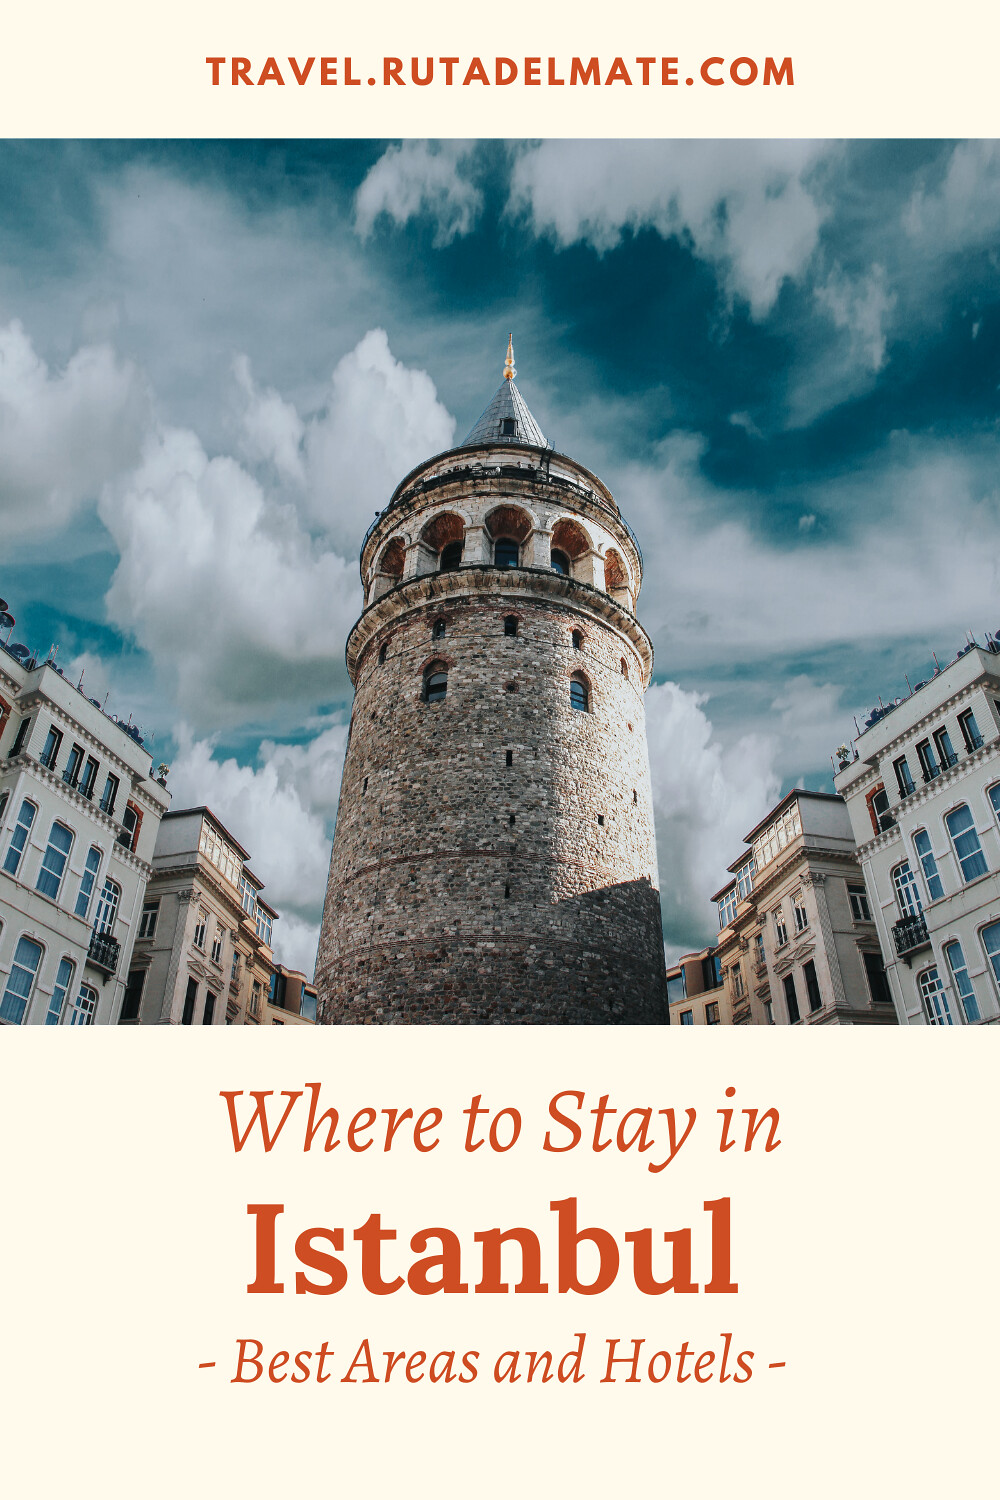 Where to stay in Istanbul: best areas and hotels